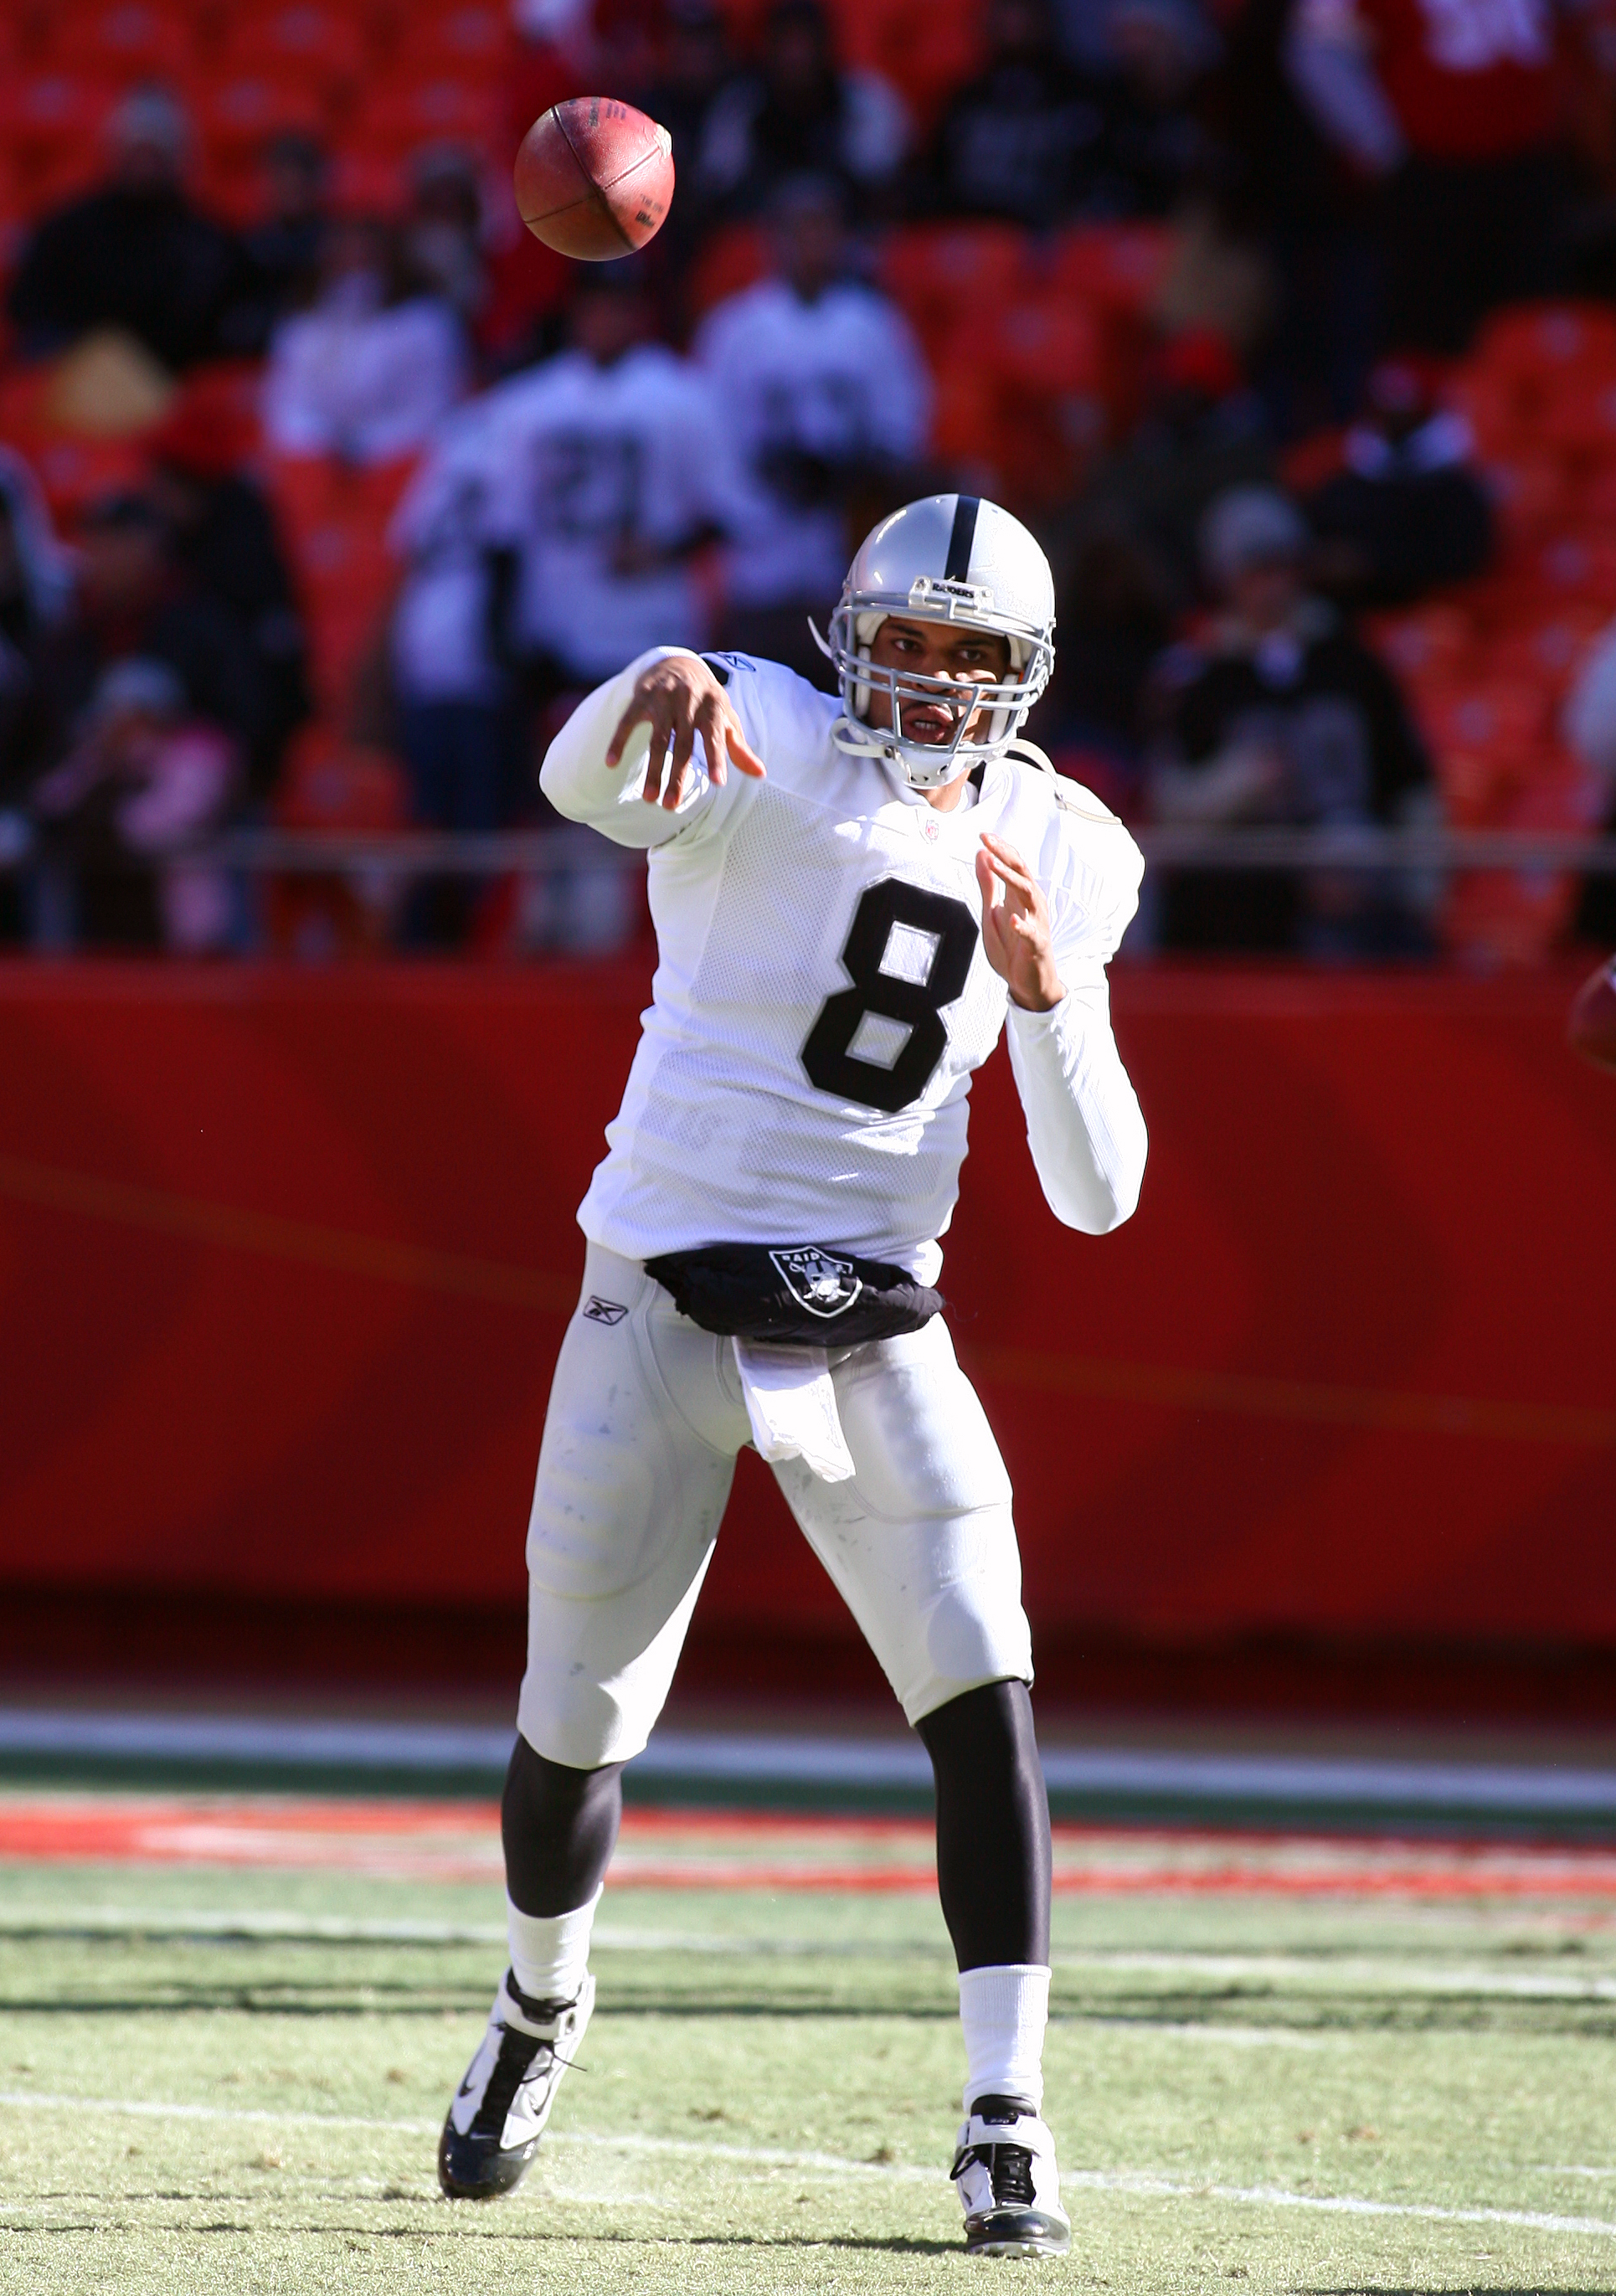 KANSAS CITY, MO - JANUARY 02:  Quarterback Jason Campbell #8 of the Oakland Raiders throws a pass in a game against the Kansas City Chiefs at Arrowhead Stadium on January 2, 2011 in Kansas City, Missouri.  (Photo by Tim Umphrey/Getty Images)